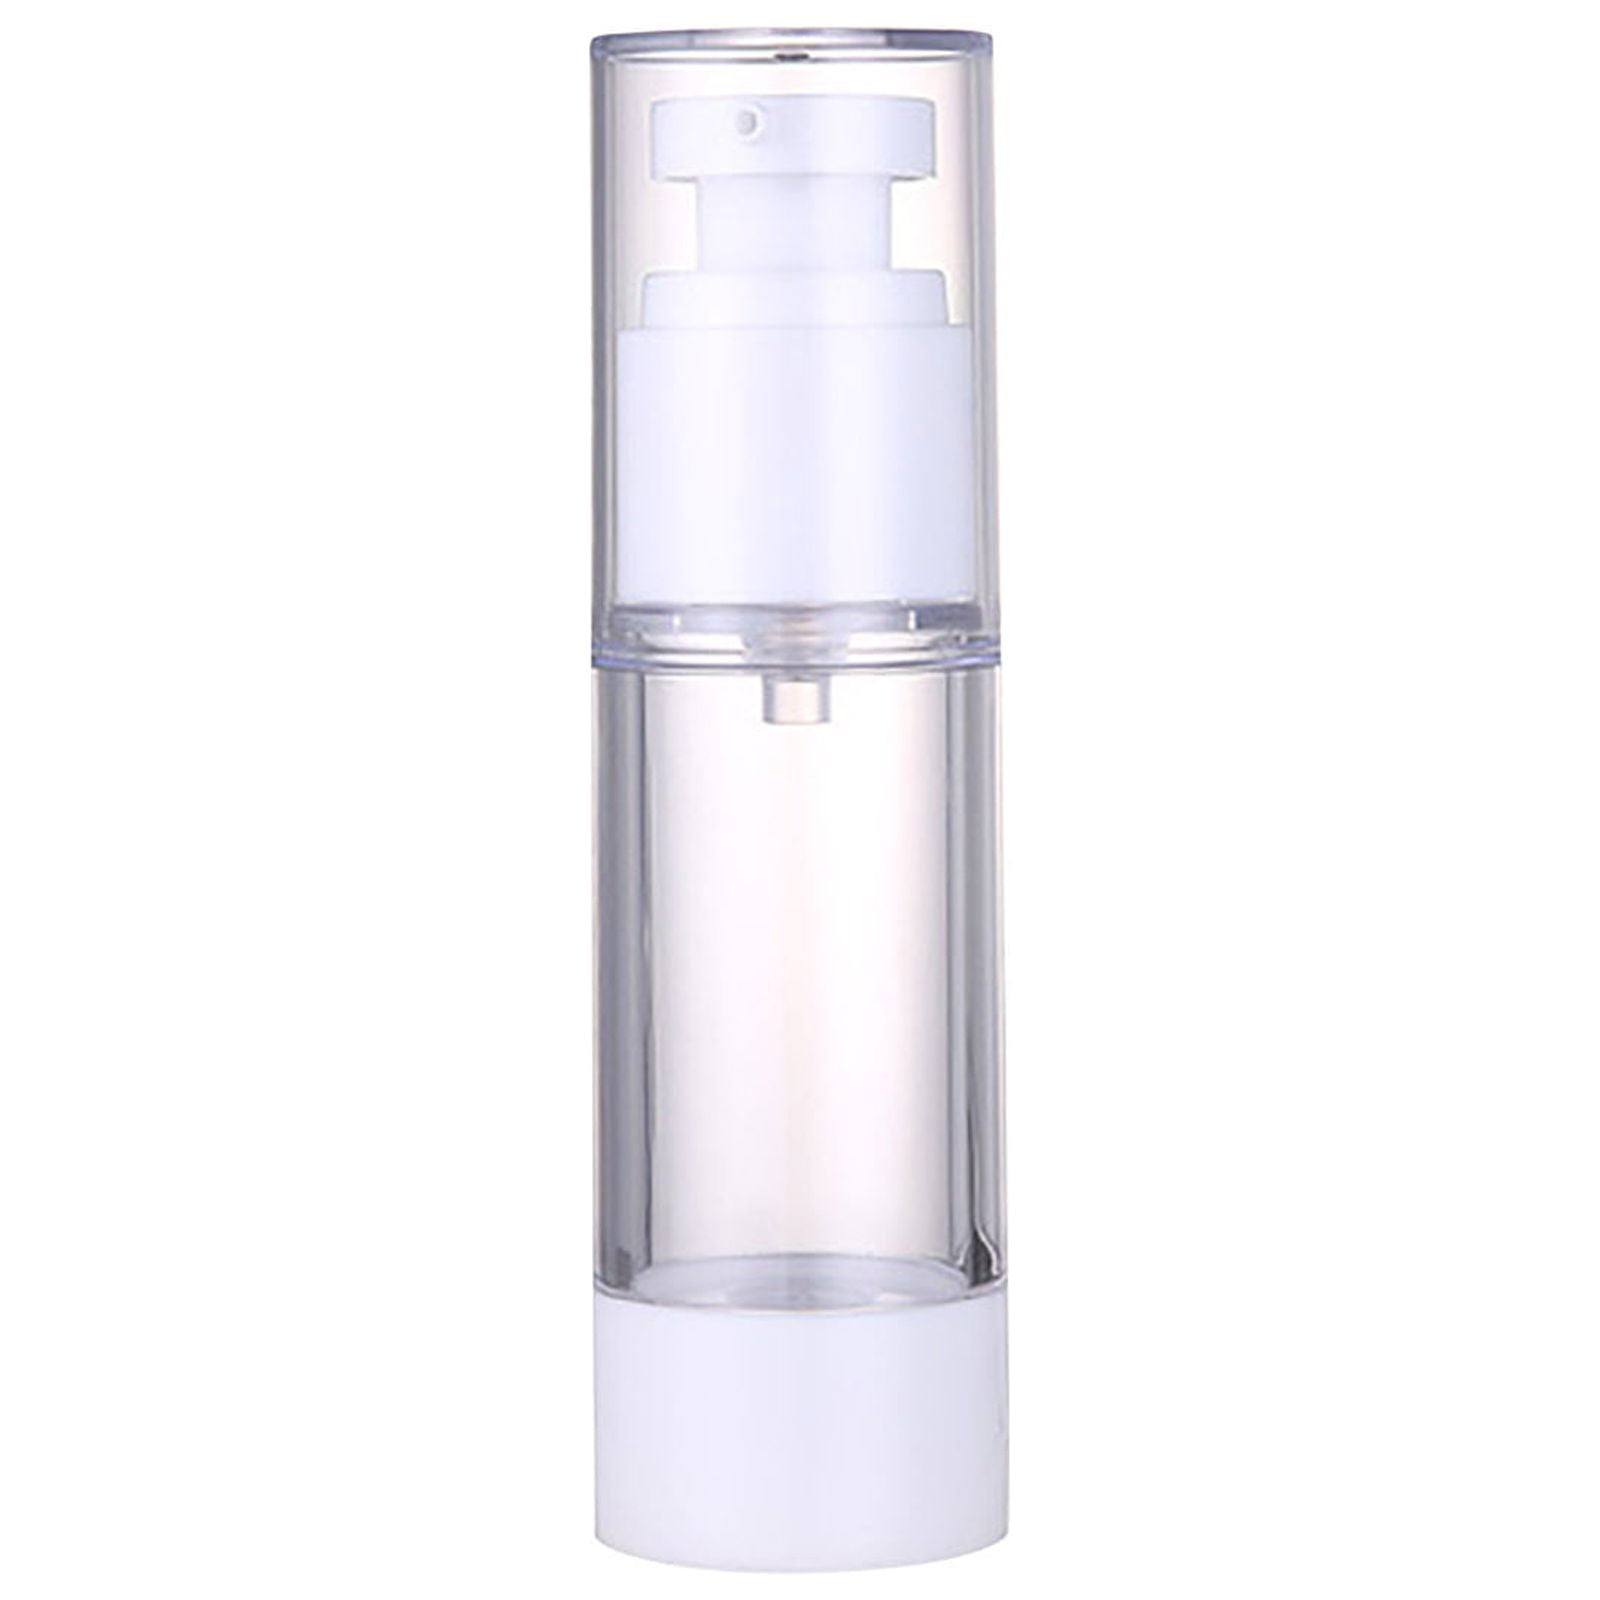 Airless Pump Press Bottle Empty Plastic Vacuum Lotion Bottles Clear Huge Lotion Bottle Travel Shampoo Containers Airplane Bottles Travel Size